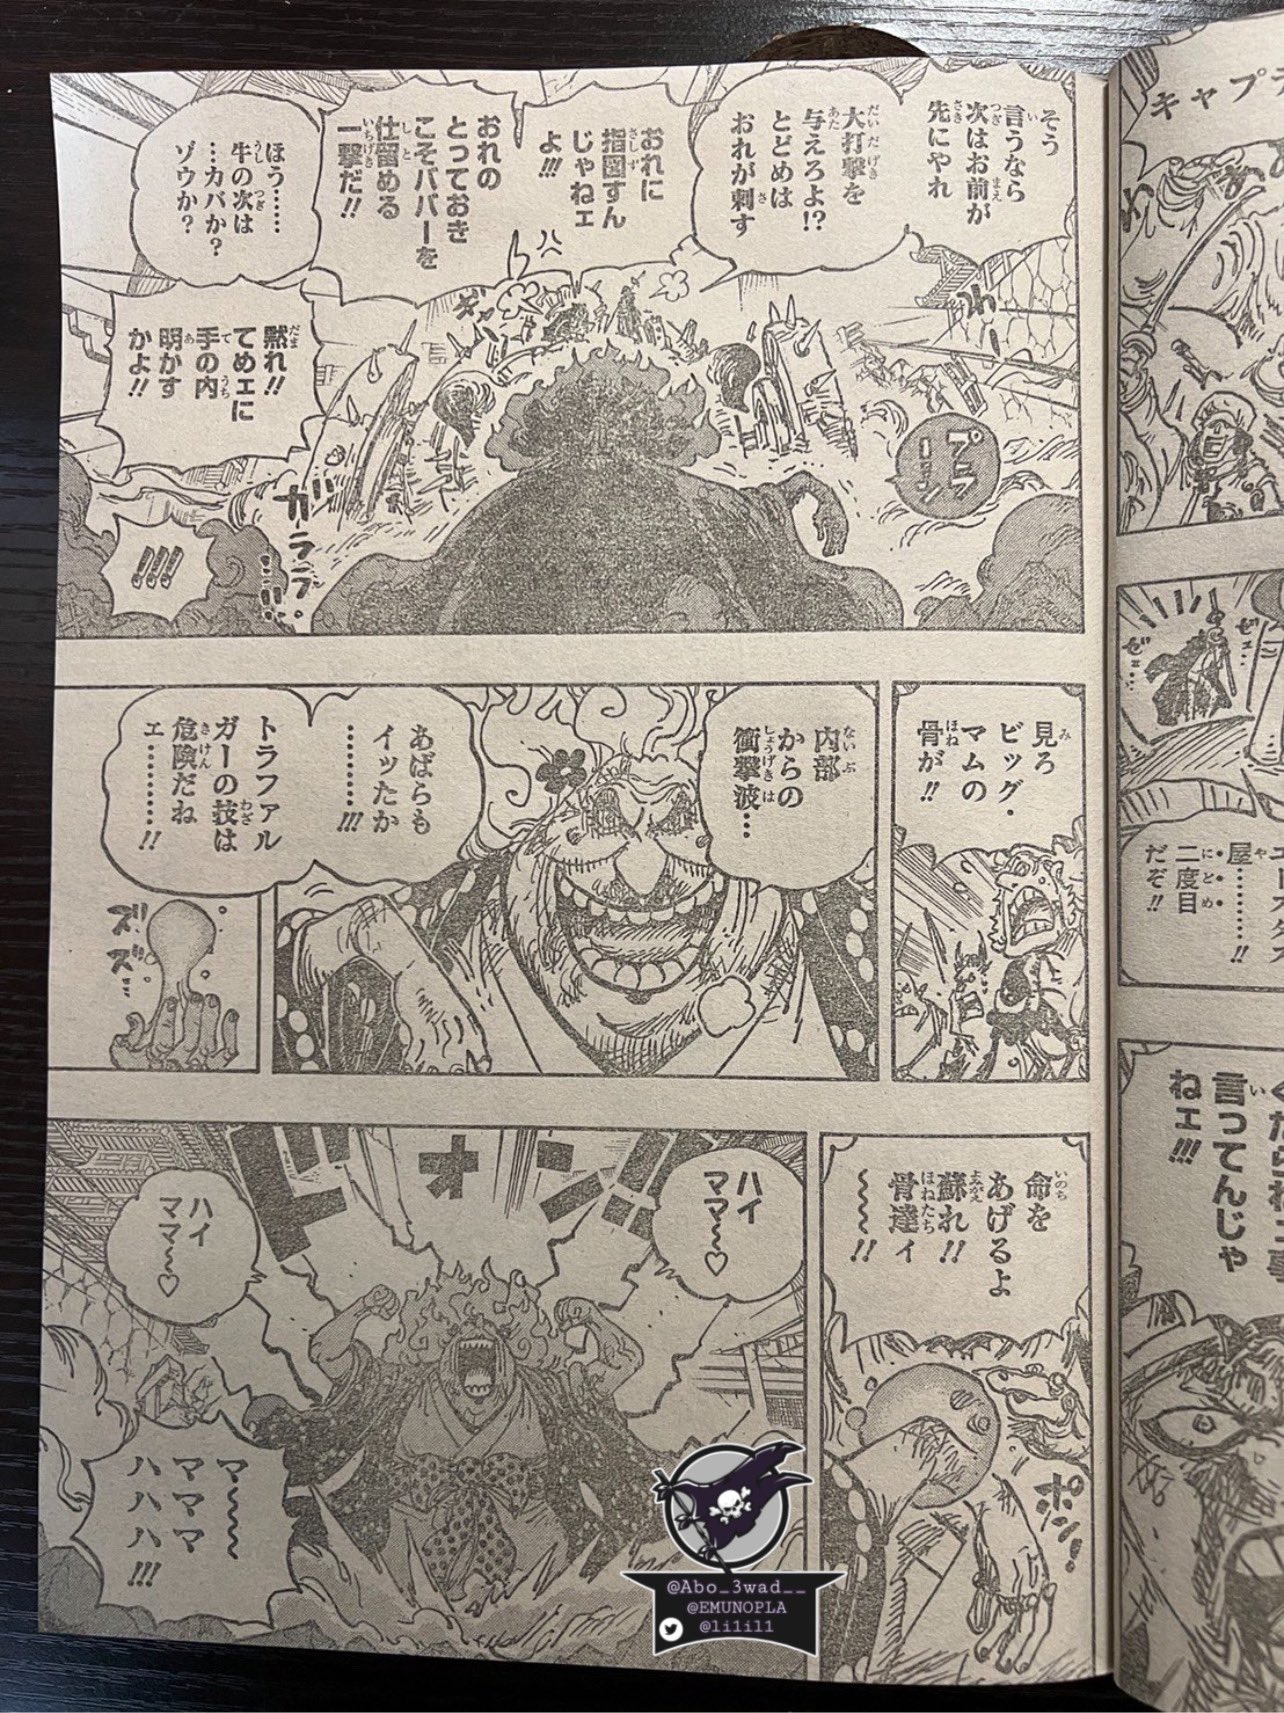 Spoiler - One Piece Chapter 1058 Spoilers Discussion, Page 1039